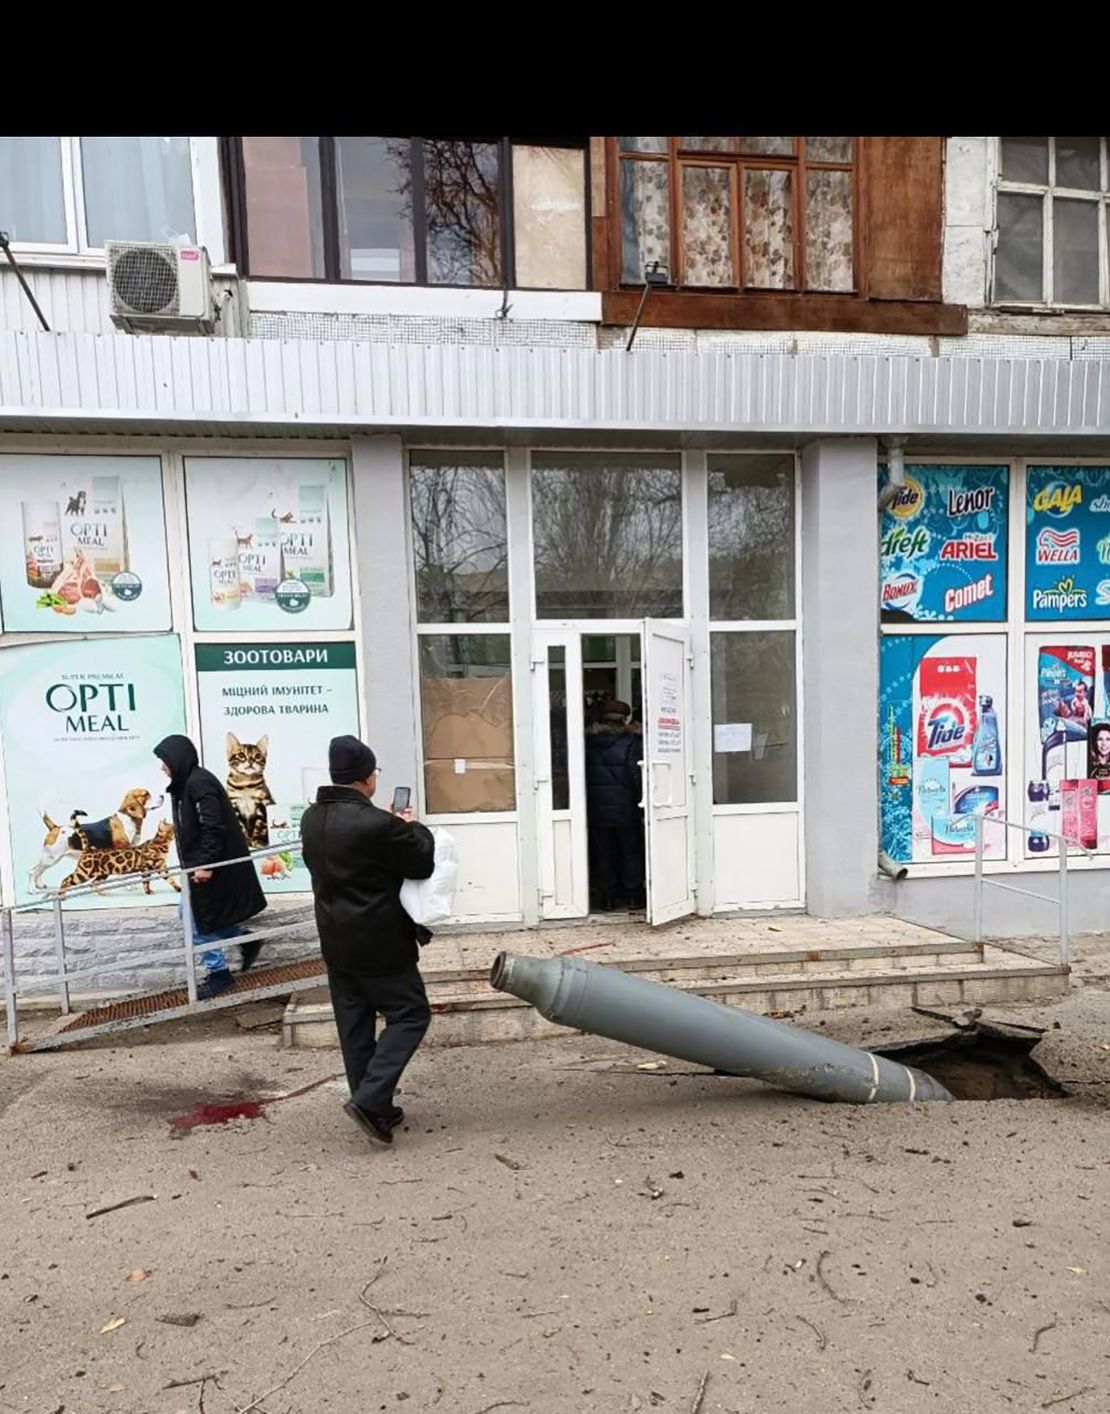 A missile is seen lodged in the ground outside a small grocery store in Kharkiv on Monday.